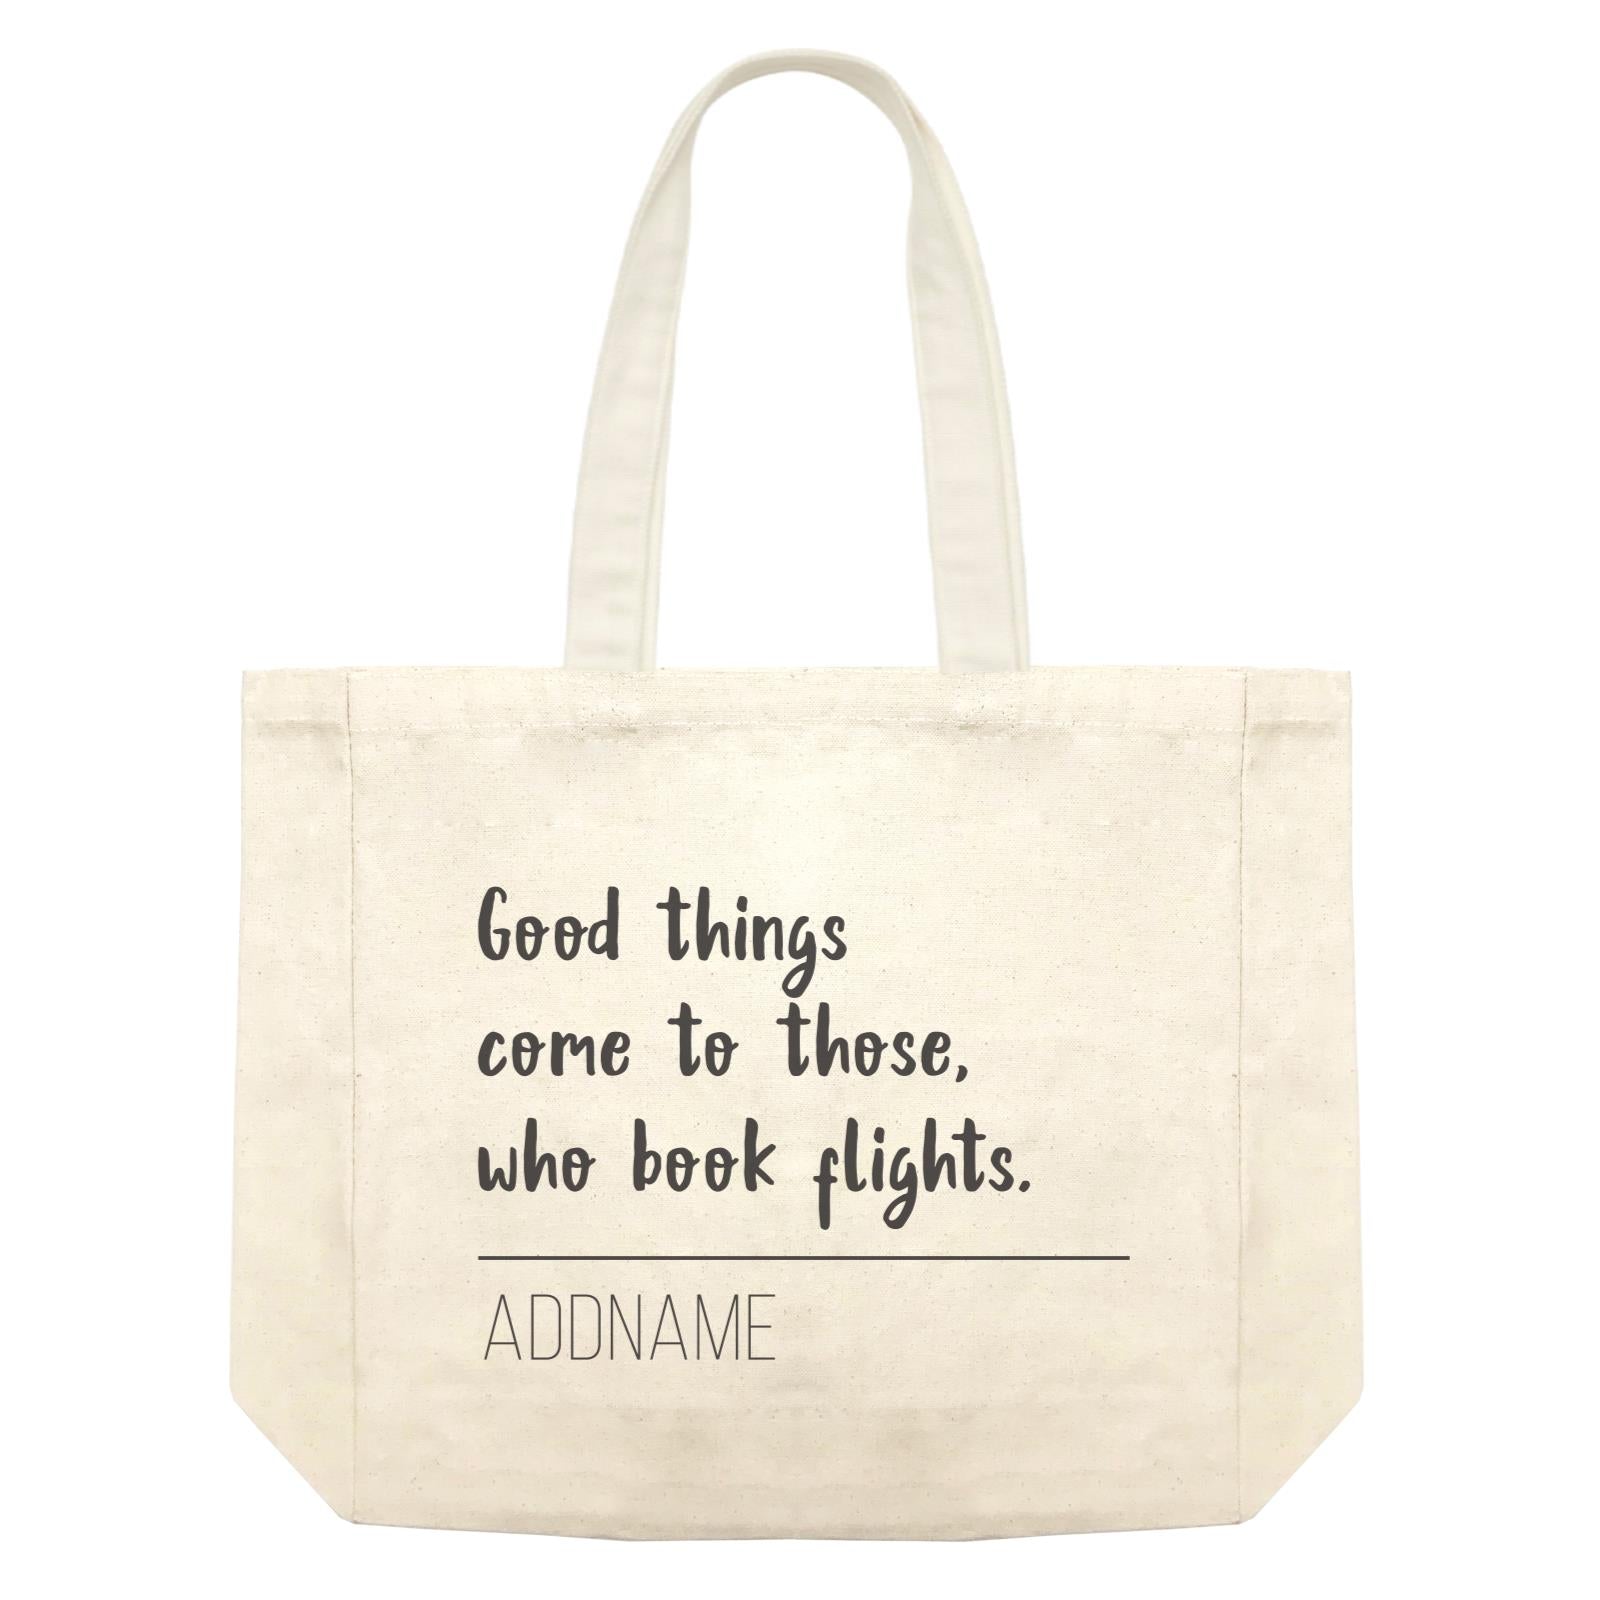 Travel Quotes Good Things Come To Those Who Book Flights Addname Shopping Bag